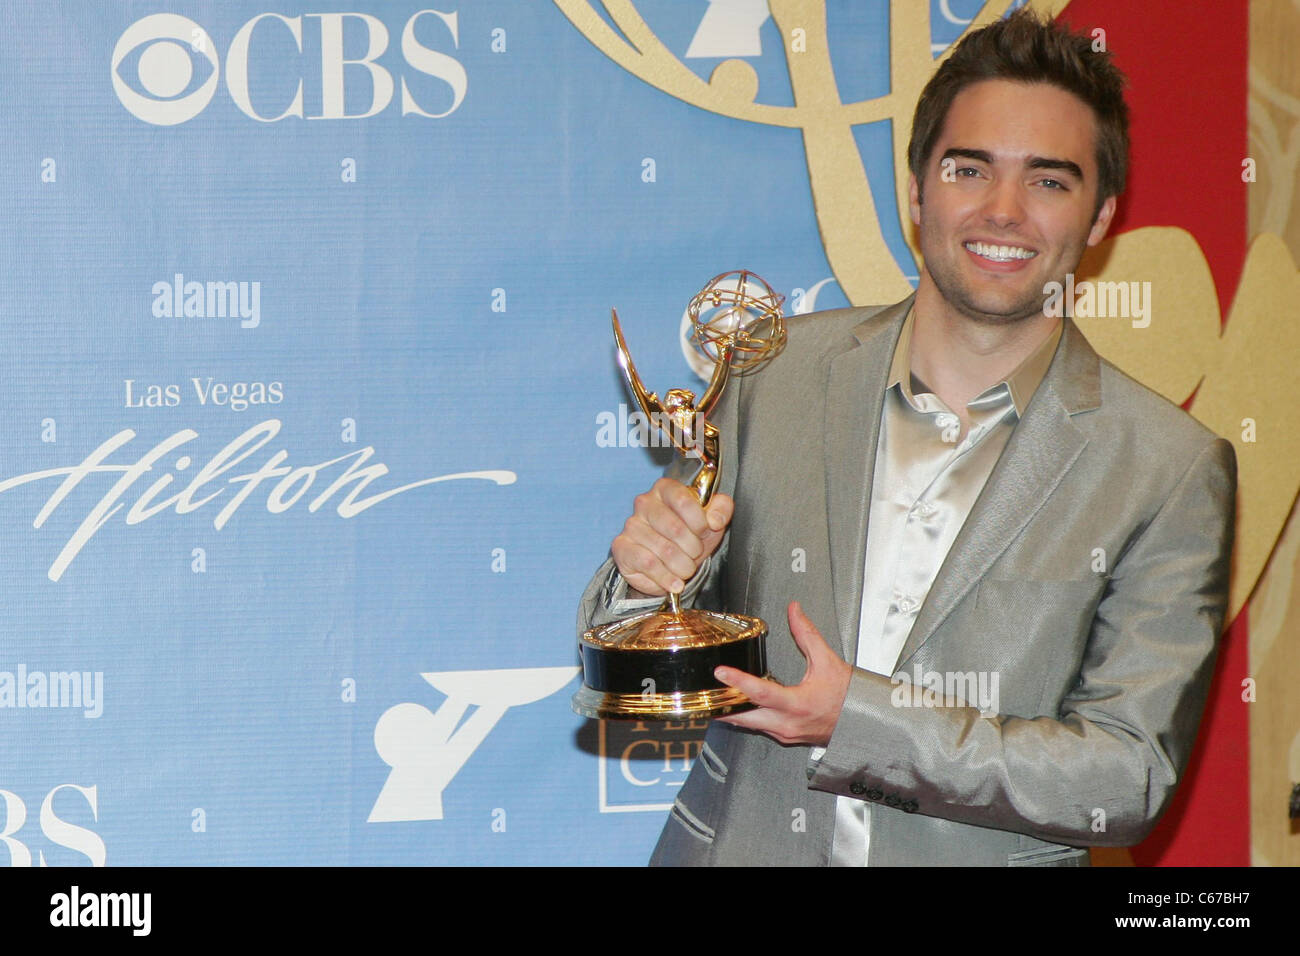 Drew Tyler Bell in the press room for 37th Annual Daytime Entertainment Emmy Awards - PRESS ROOM, Las Vegas Hilton, Las Vegas, NV June 27, 2010. Photo By: James Atoa/Everett Collection Stock Photo